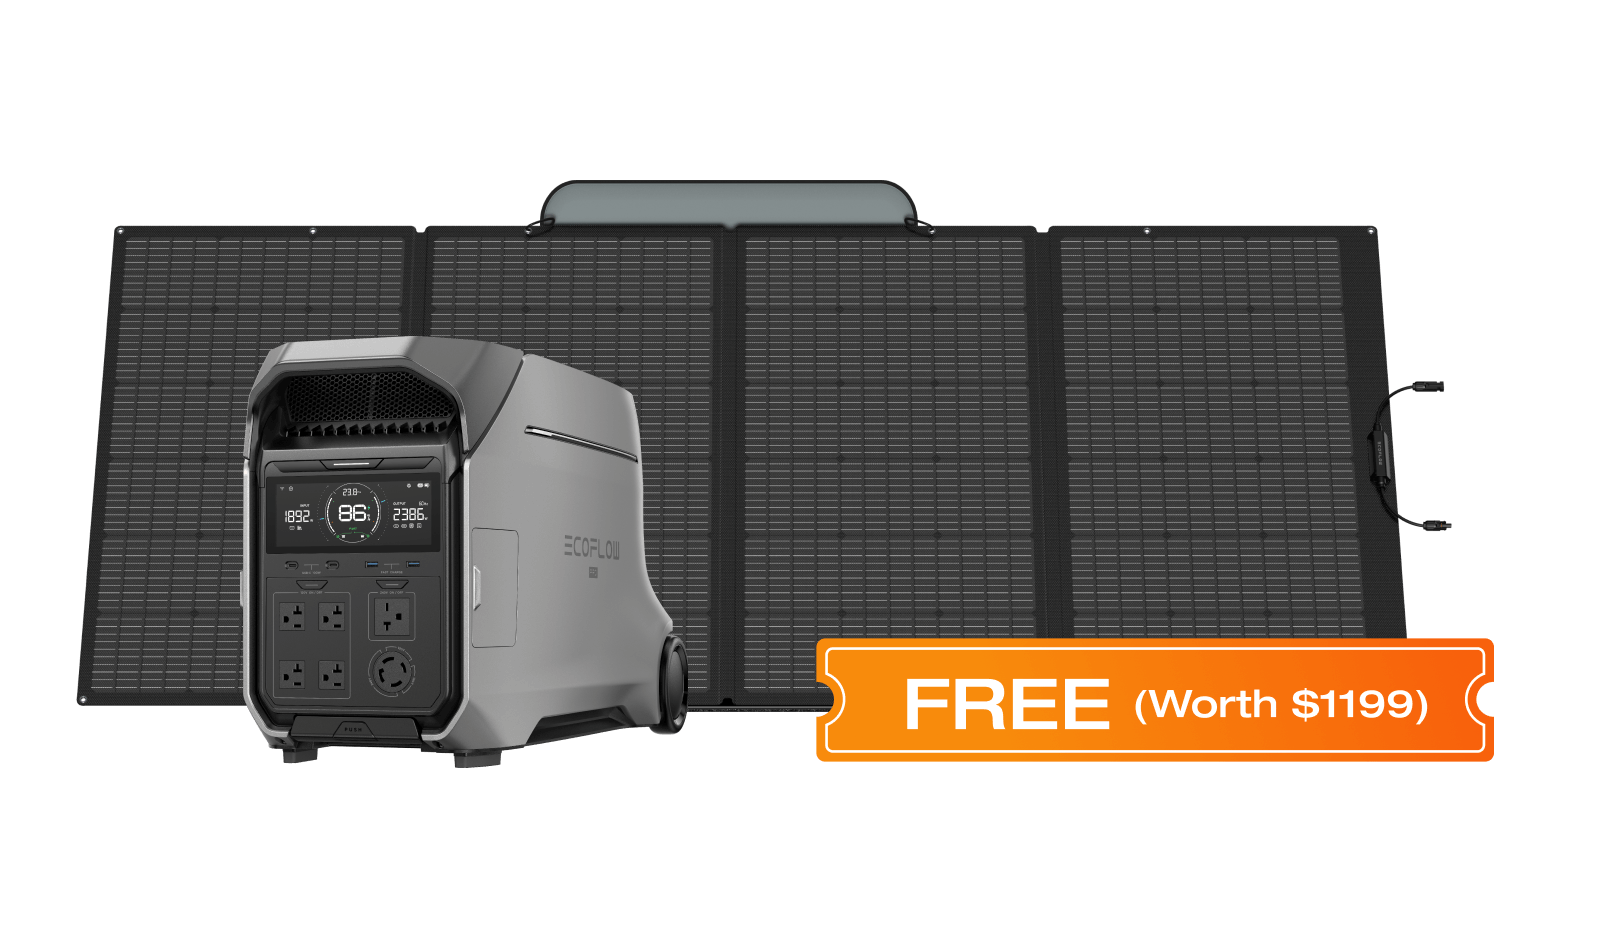 Purchase corresponding EcoFlow DELTA Pro 3 bundle and receive the 400W Portable Solar Panel for Free